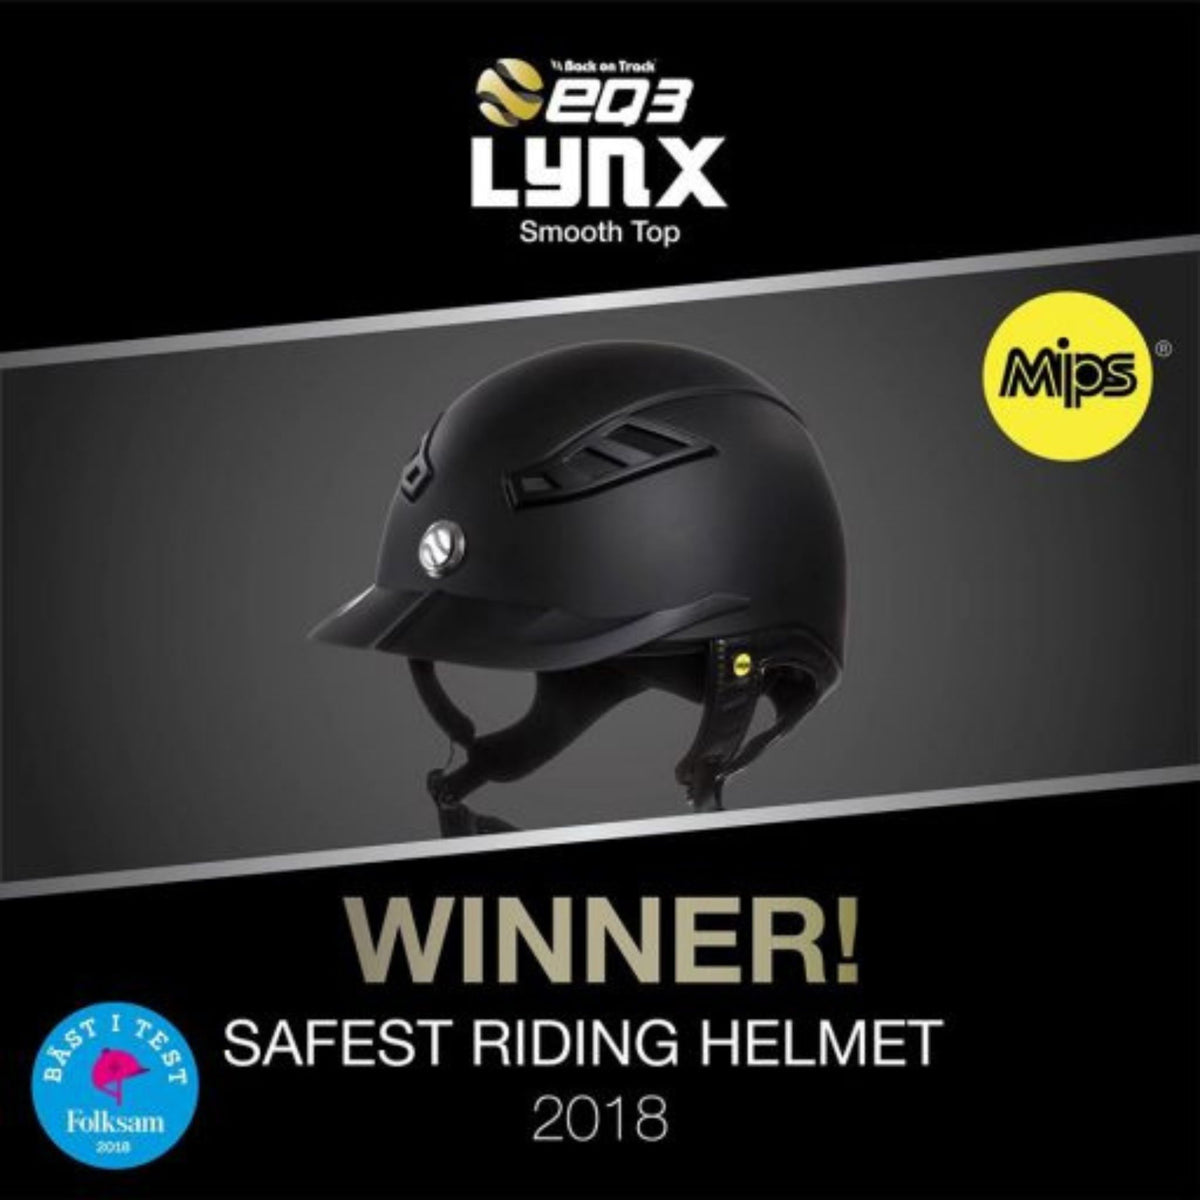 Safest riding helmet award with Mips badge, and image of helmet.